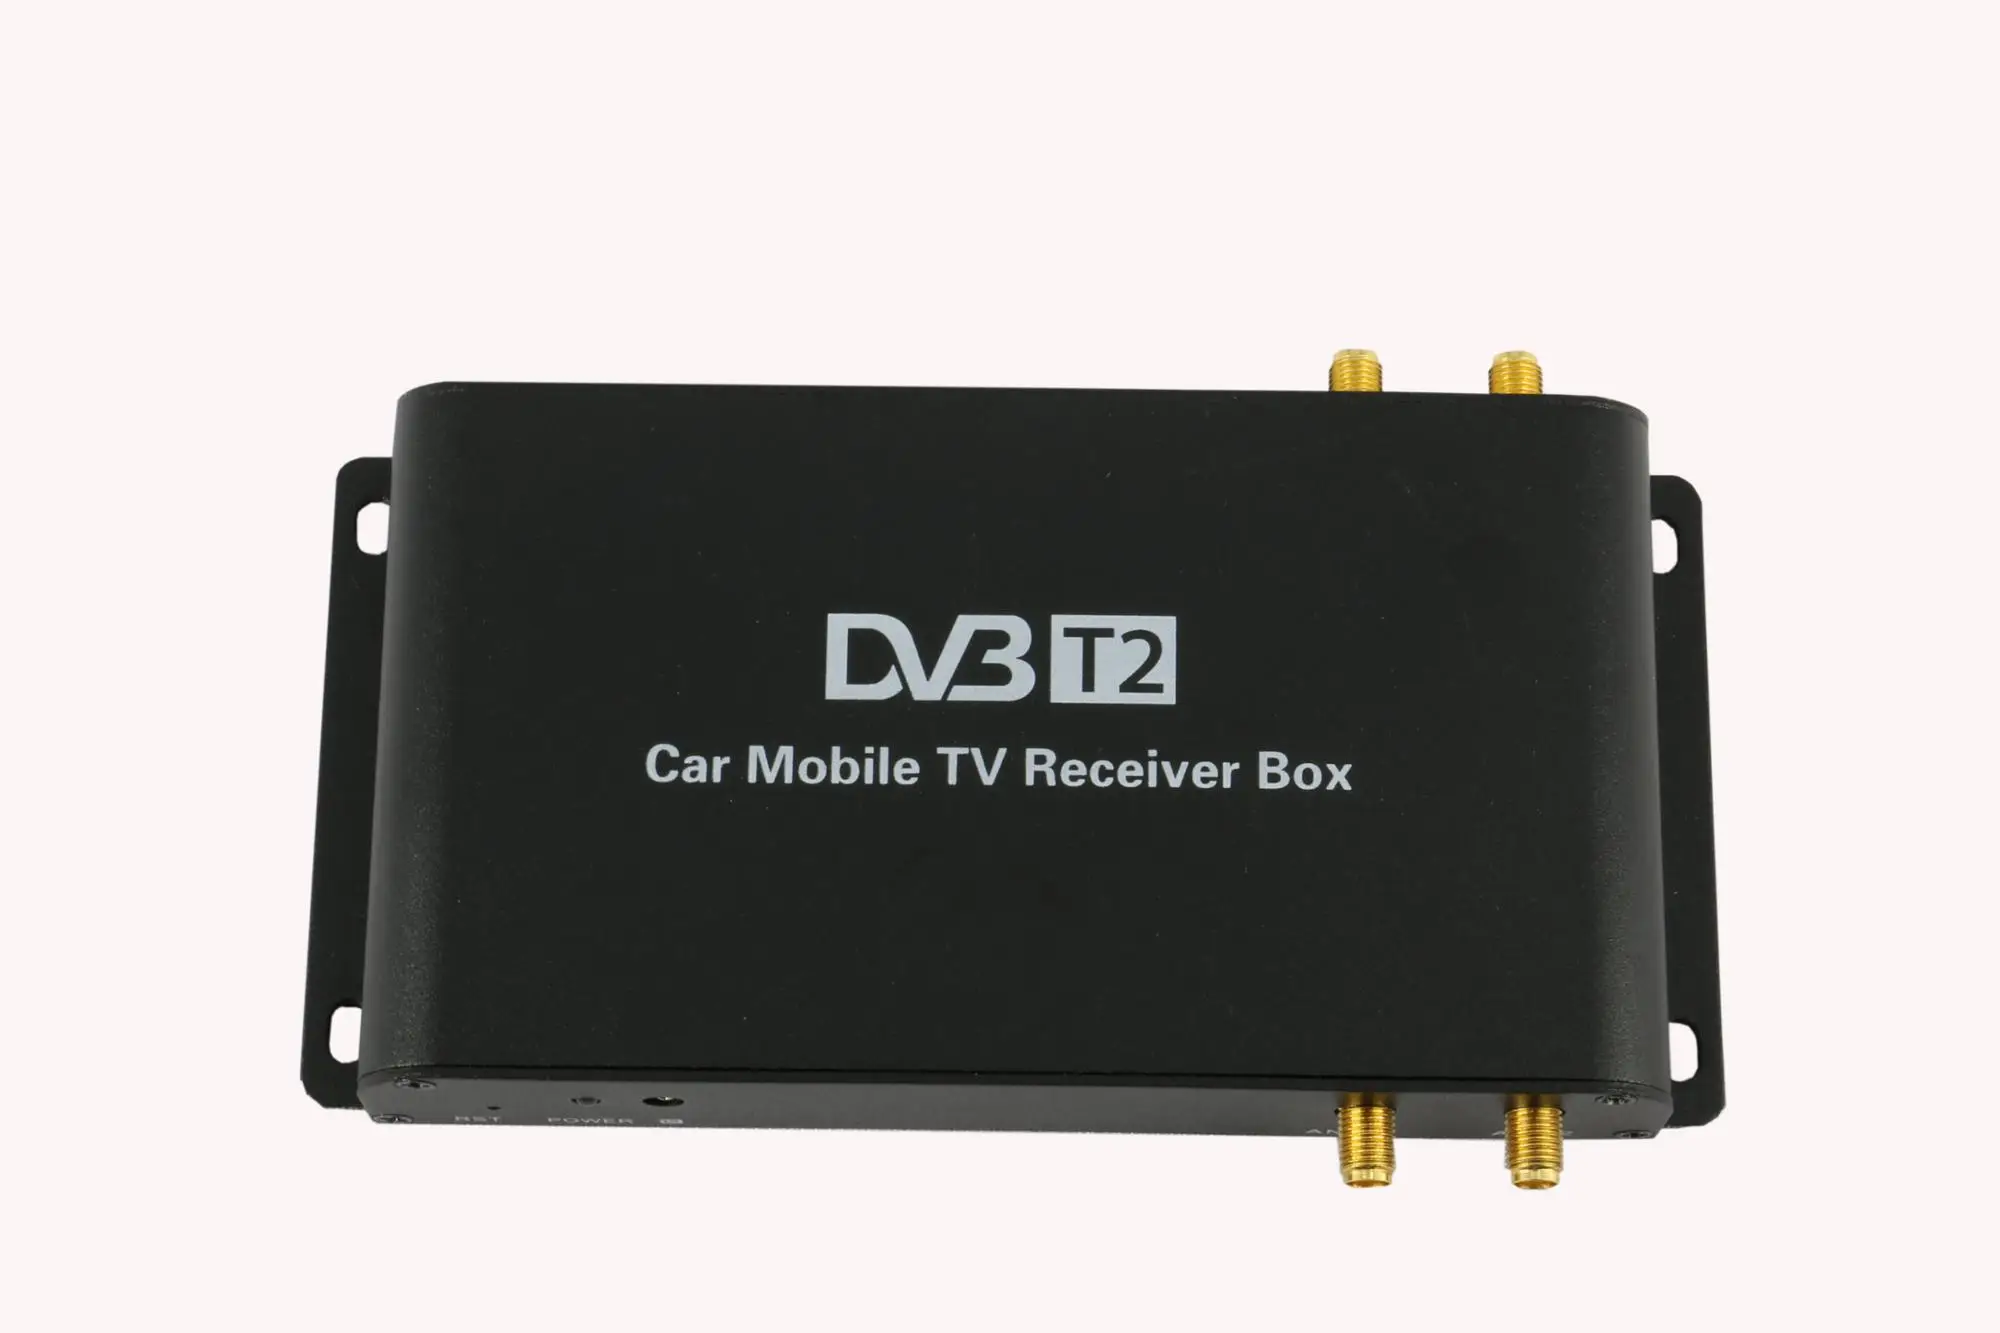 Hd Mobile Digital Car Dvb T2 Terrestrial Tv Receiver For Russia Thailand Colombia Indonesia Buy Car Dvb T2 Digital Tv Receiver With Four Tuner Mobile Digital Car Dvb T2 Tv Receiver With H 264 Mpeg4 Hd